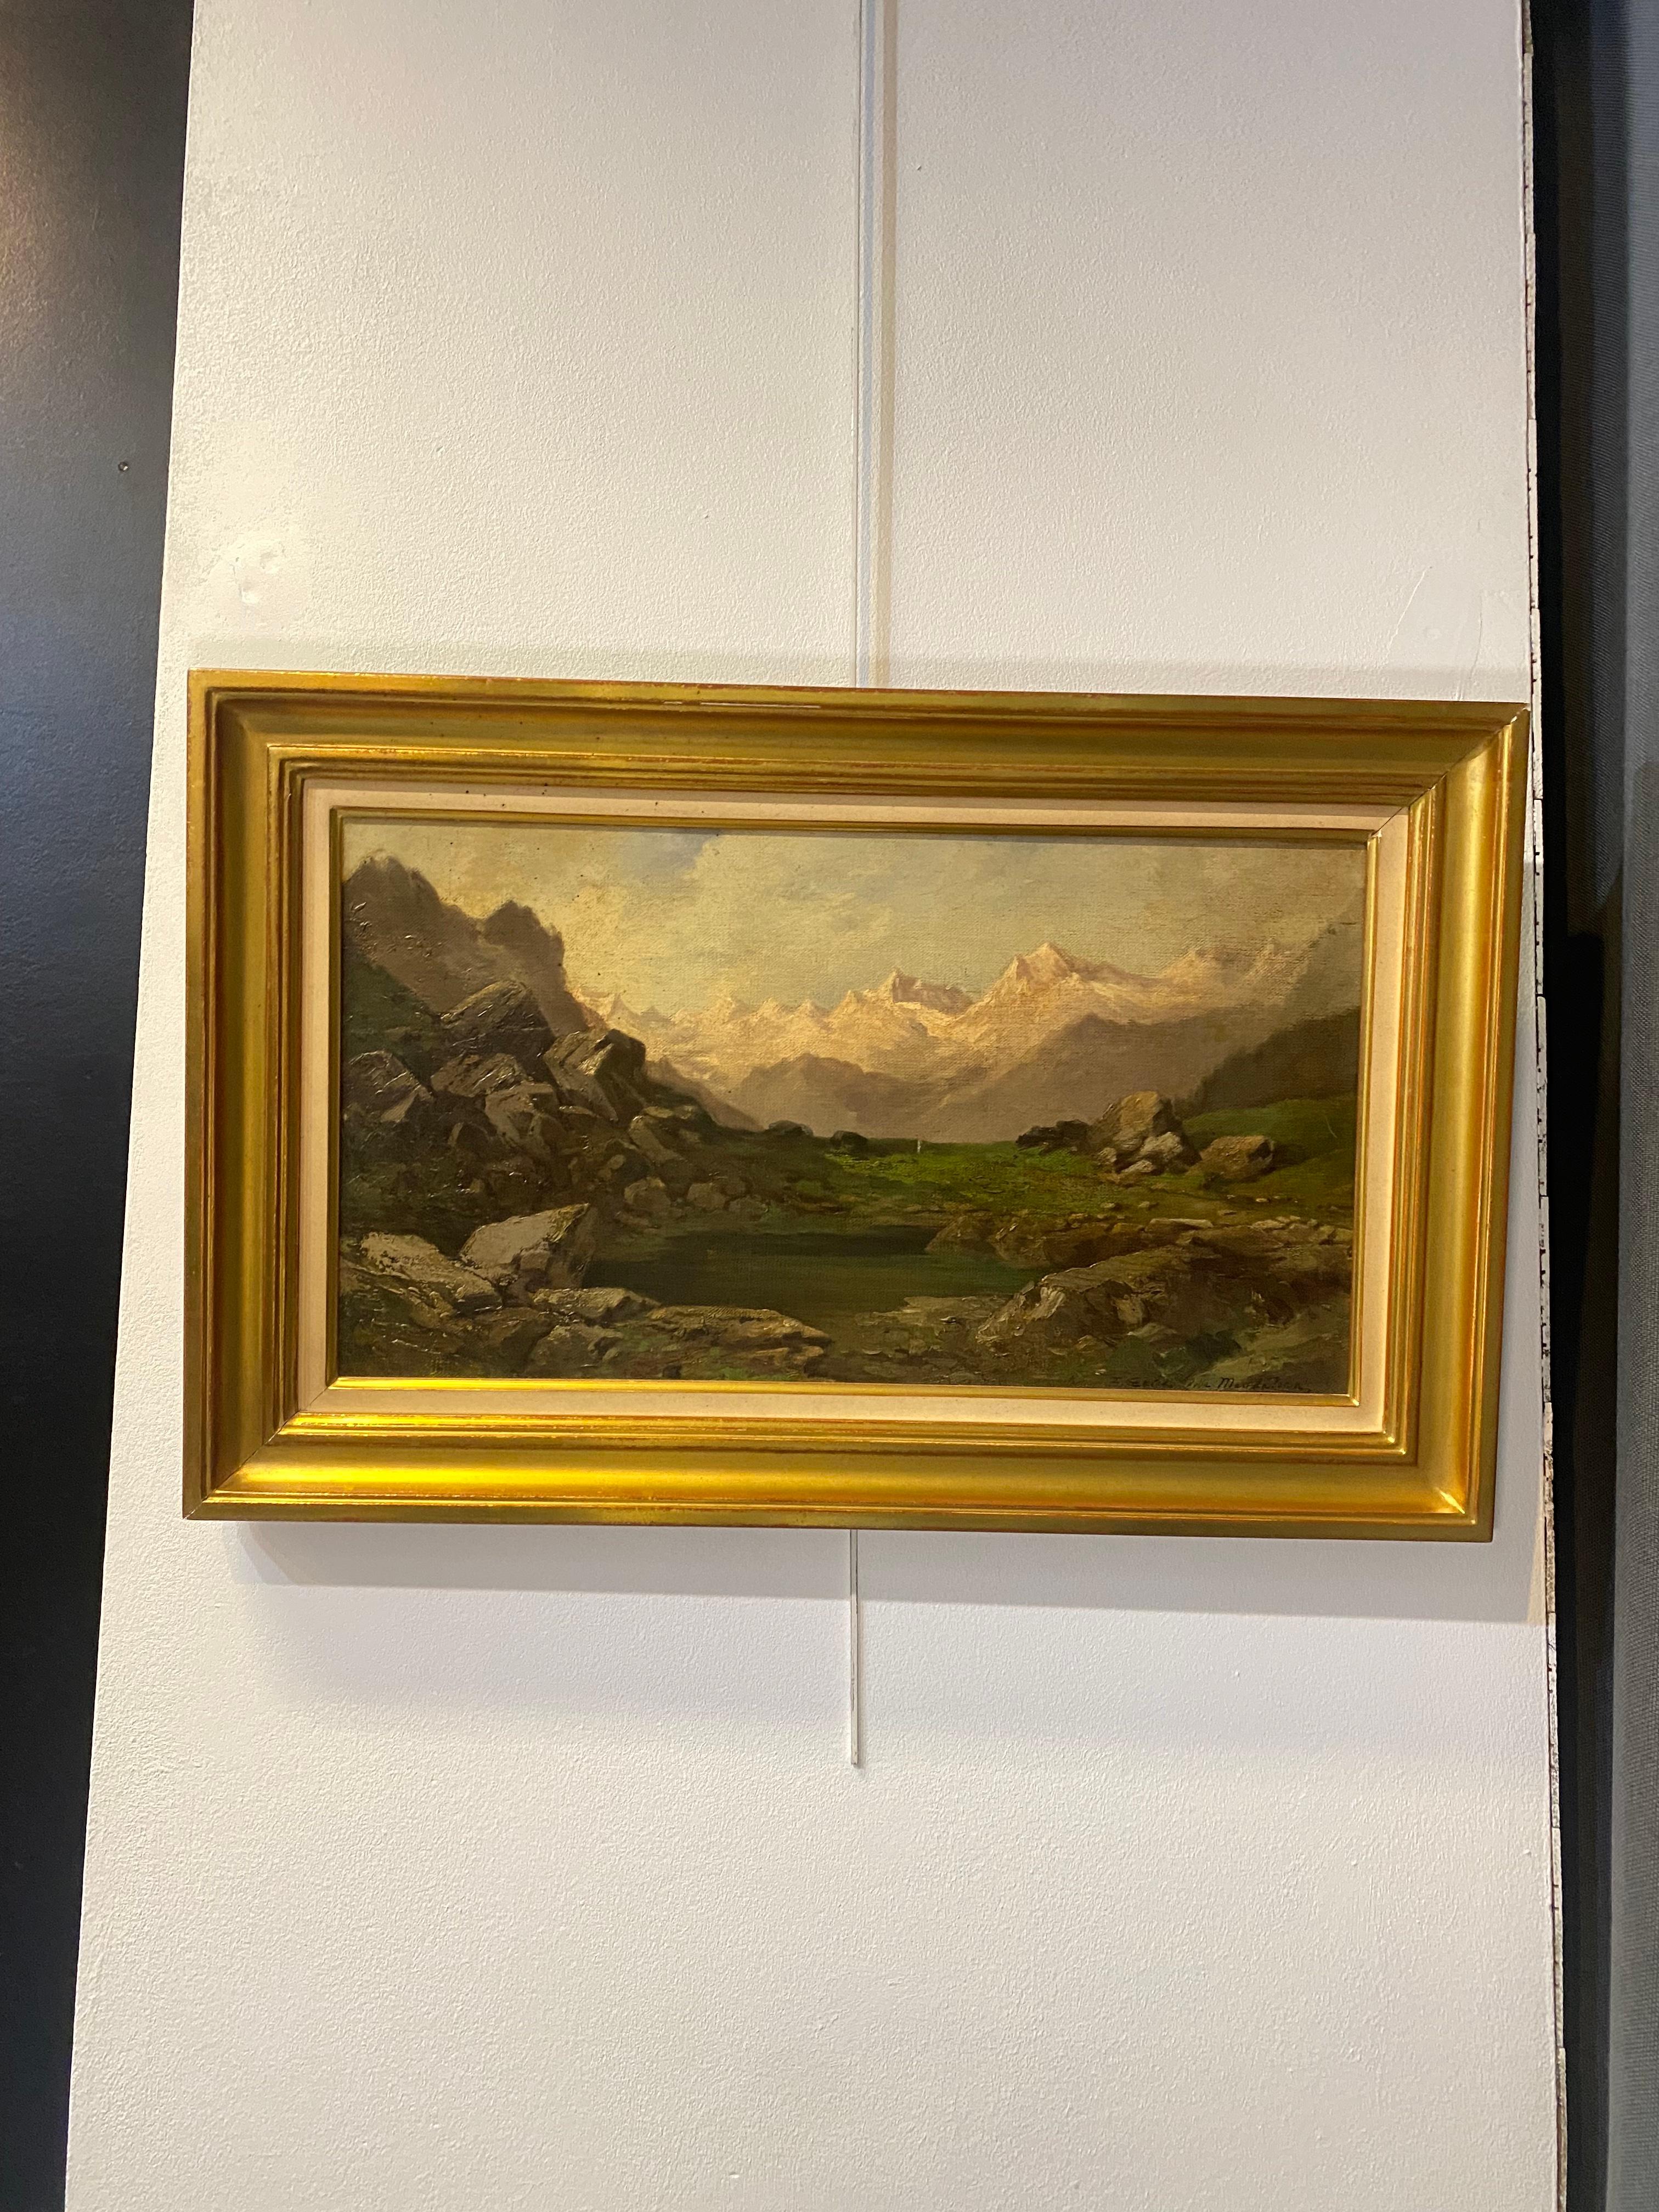 Swiss mountain landscape - Oil on canvas 35x62 cm - Modern Painting by Unknown